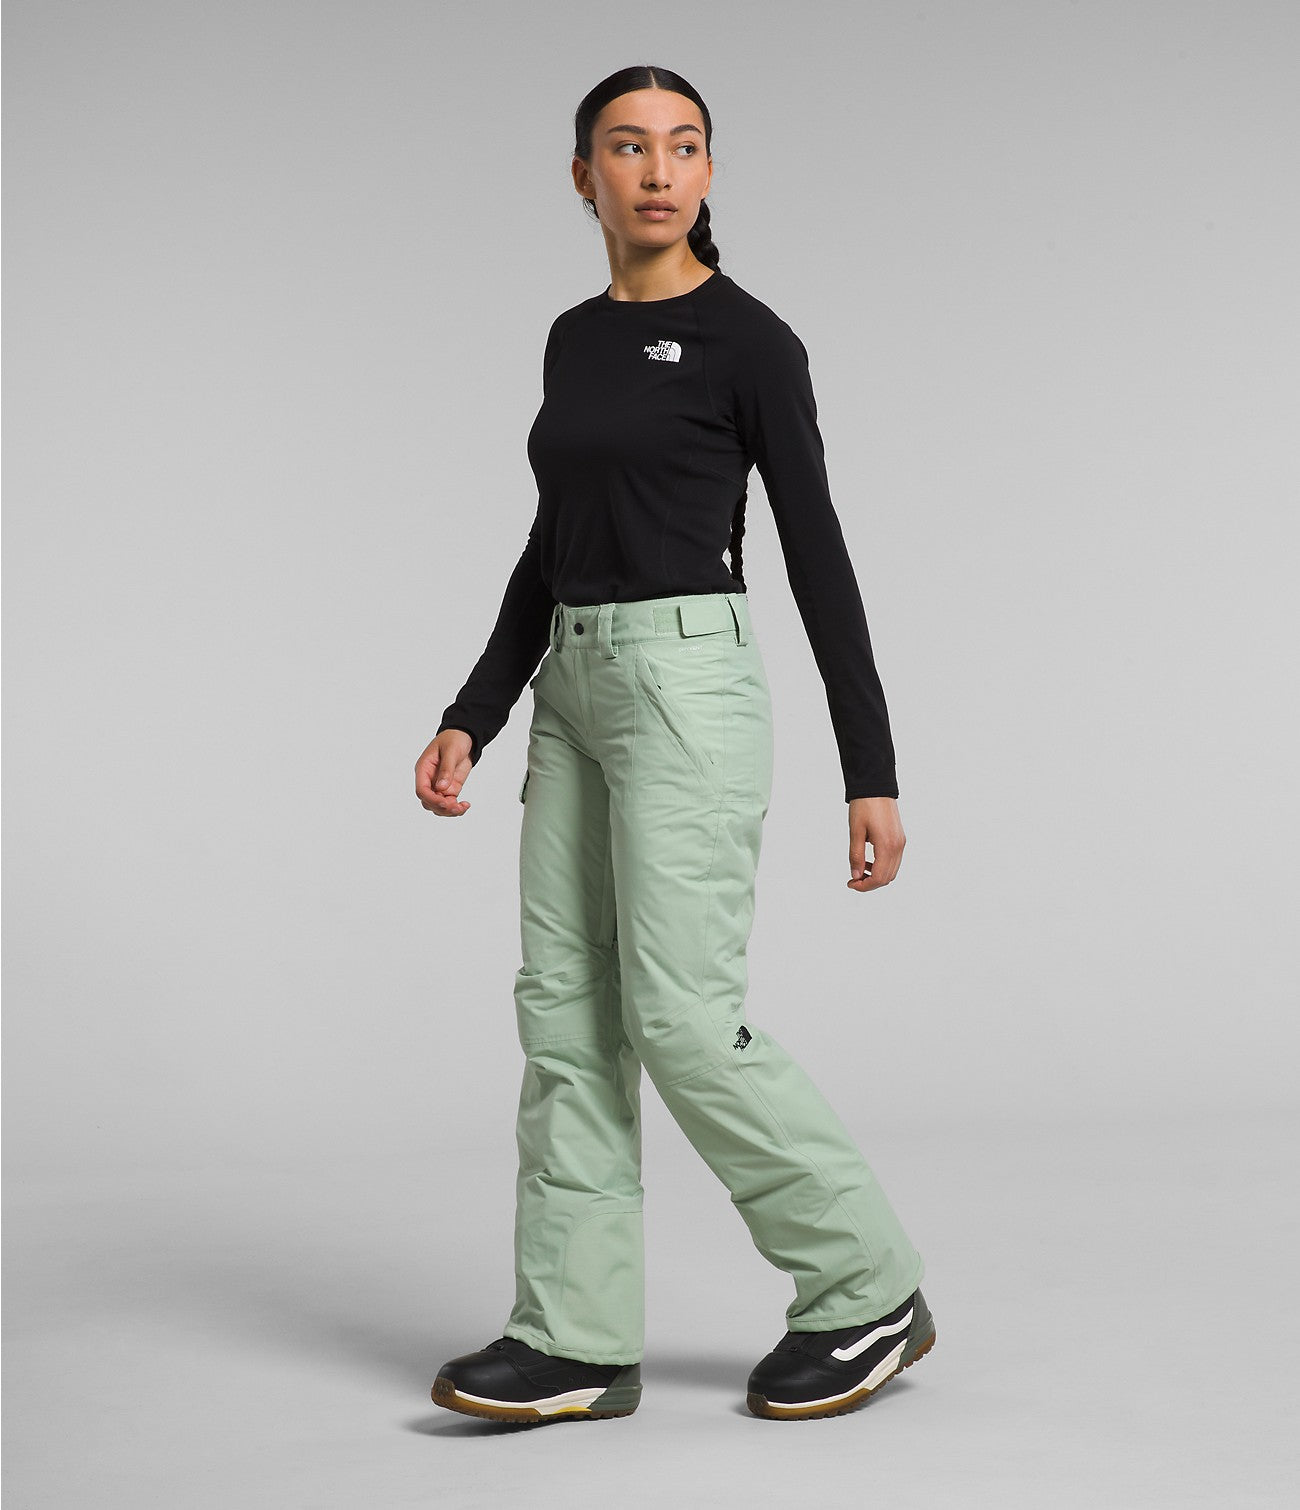 The North Face Women's Freedom Insulated Pant Wild Ginger - Aistriu